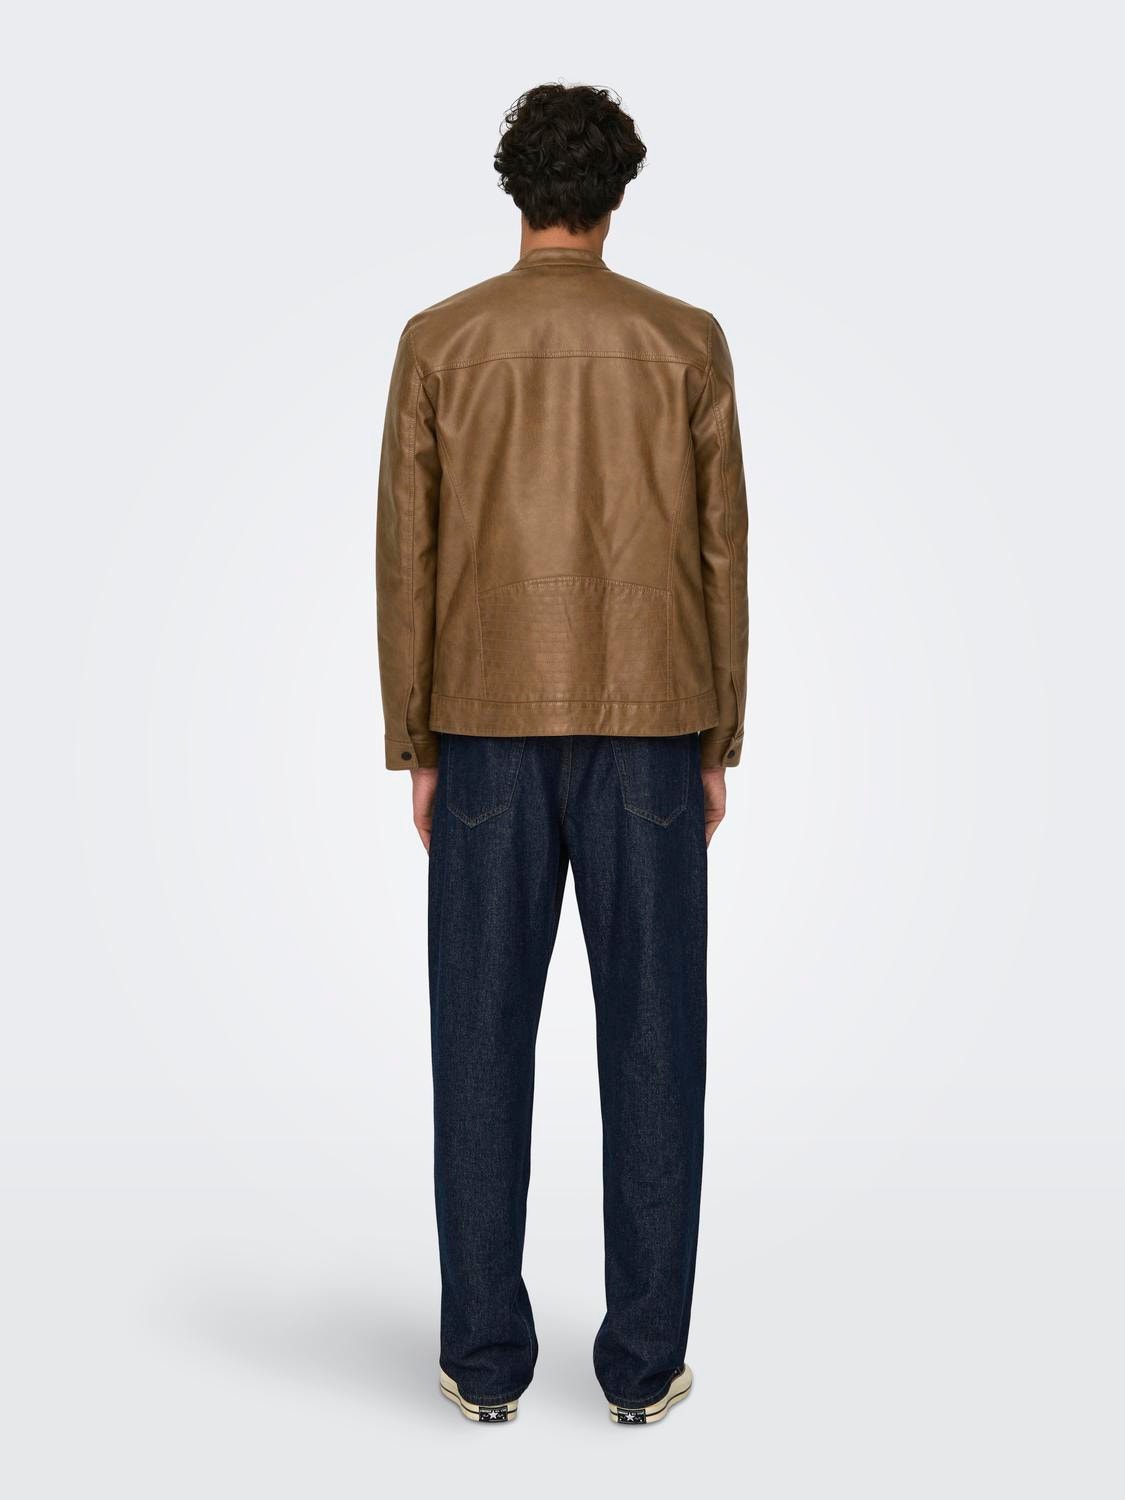 ONLY & SONS Jacket -Monks Robe - 22011975